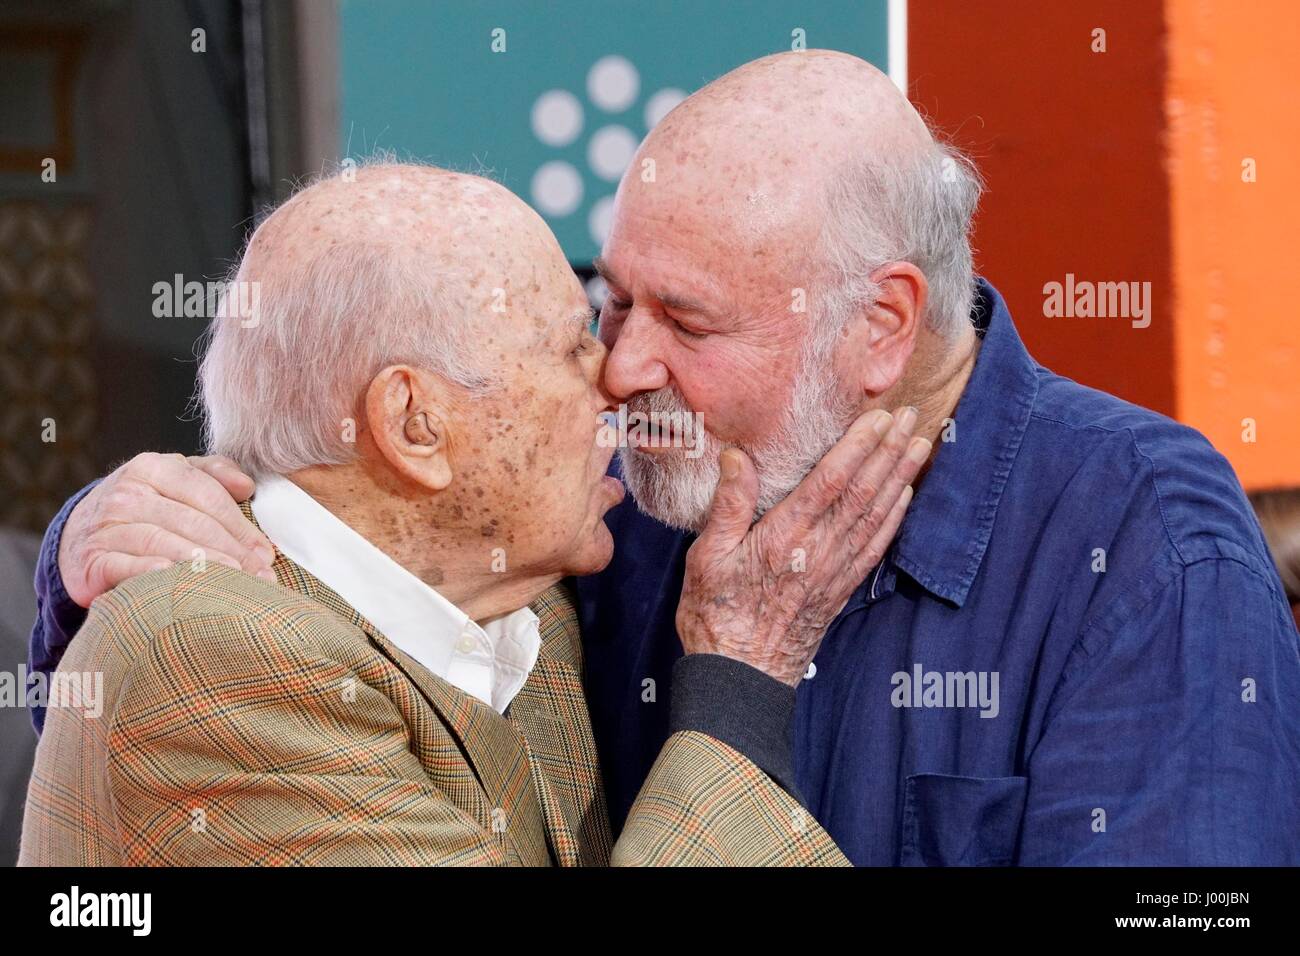 Los Angeles, CA, USA. 7th Apr, 2017. Carl Reiner, Rob Reiner at a public appearance for Carl Reiner and Rob Reiner Hand- and Footprint Ceremony, TCL Chinese Theatre (formerly Grauman's), Los Angeles, CA April 7, 2017. Credit: Priscilla Grant/Everett Collection/Alamy Live News Stock Photo